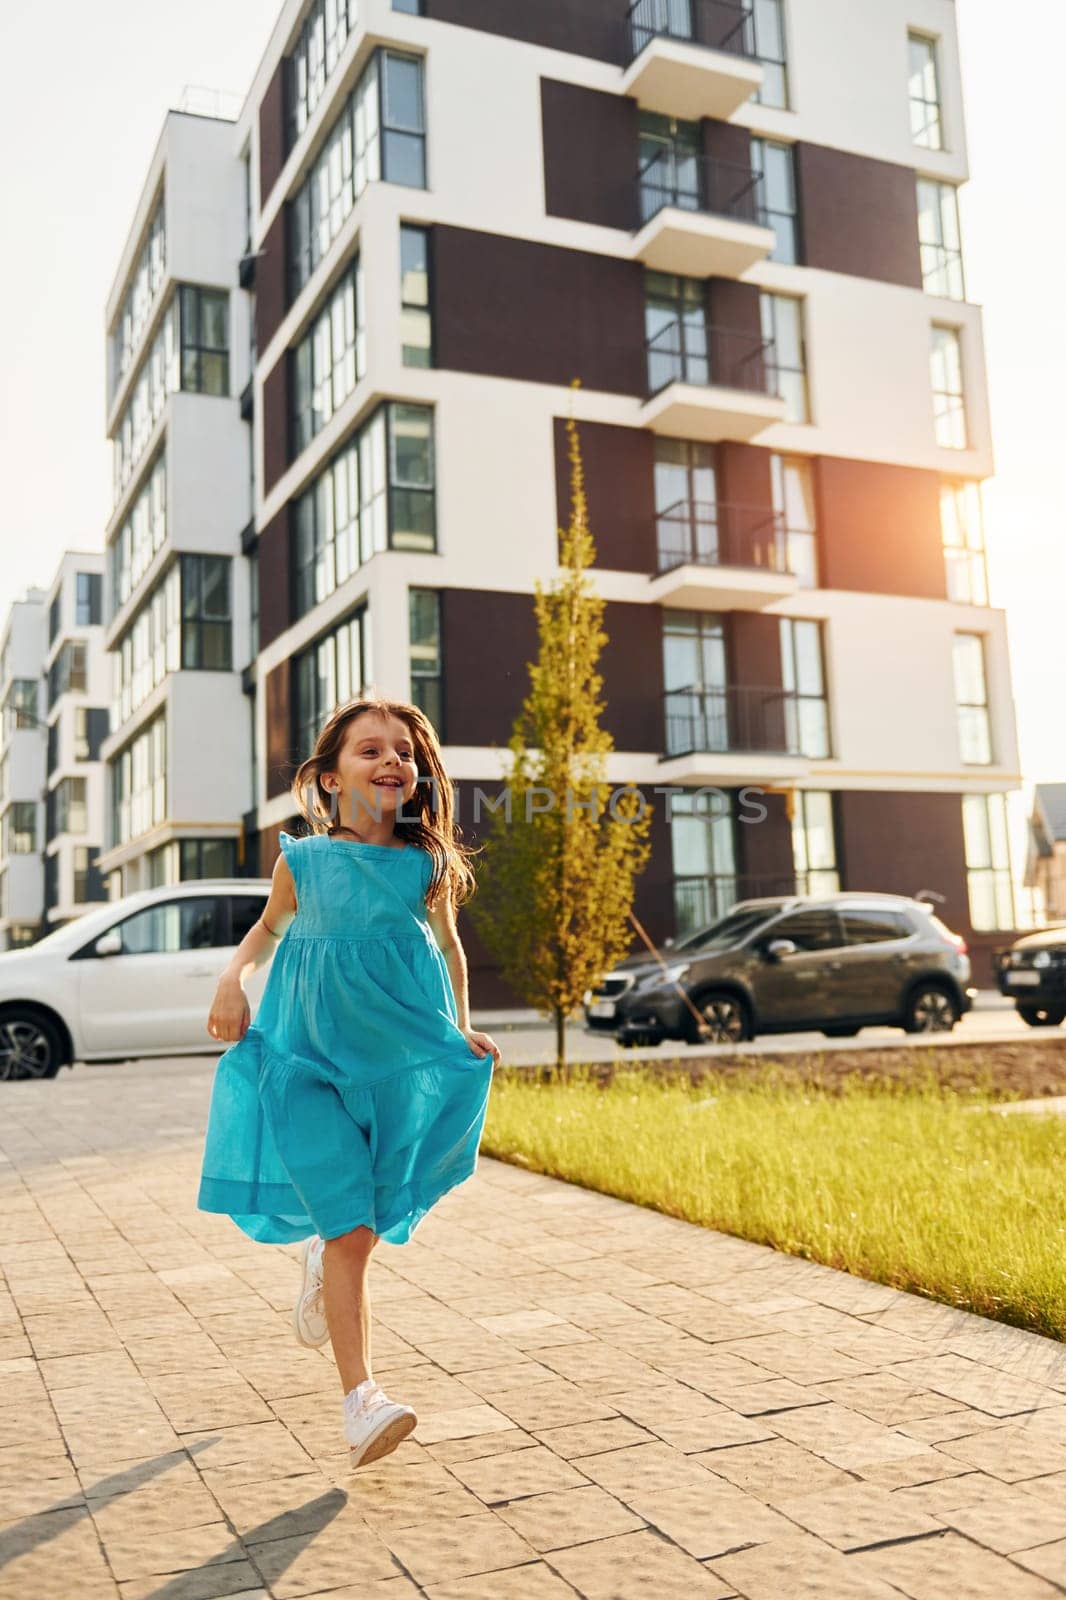 Cheerful little girl walking outdoors in the city in dress.